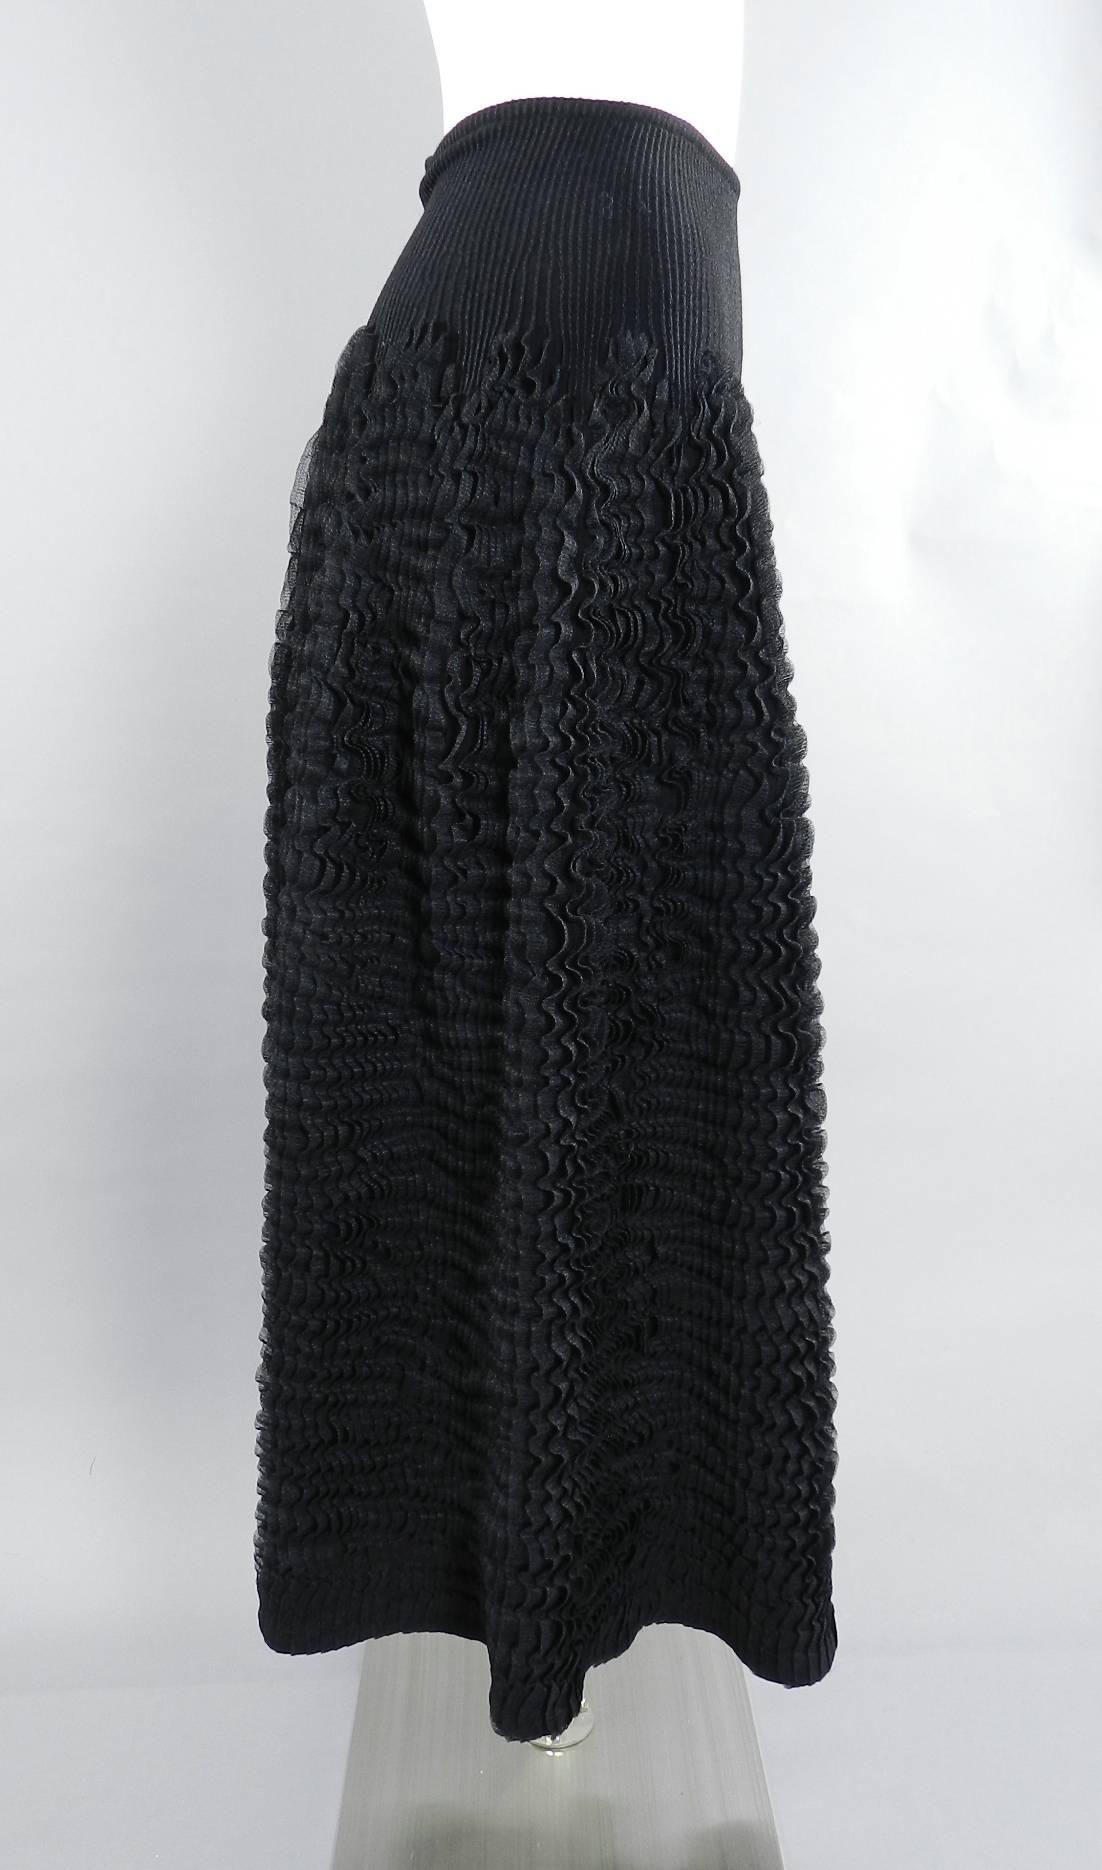 Azzedine Alaia black knit skirt.  Brand new with original retail price tag of $4975+. Stretch knit ribbed fabric with sheer knit ruffle design. Waist measures 24